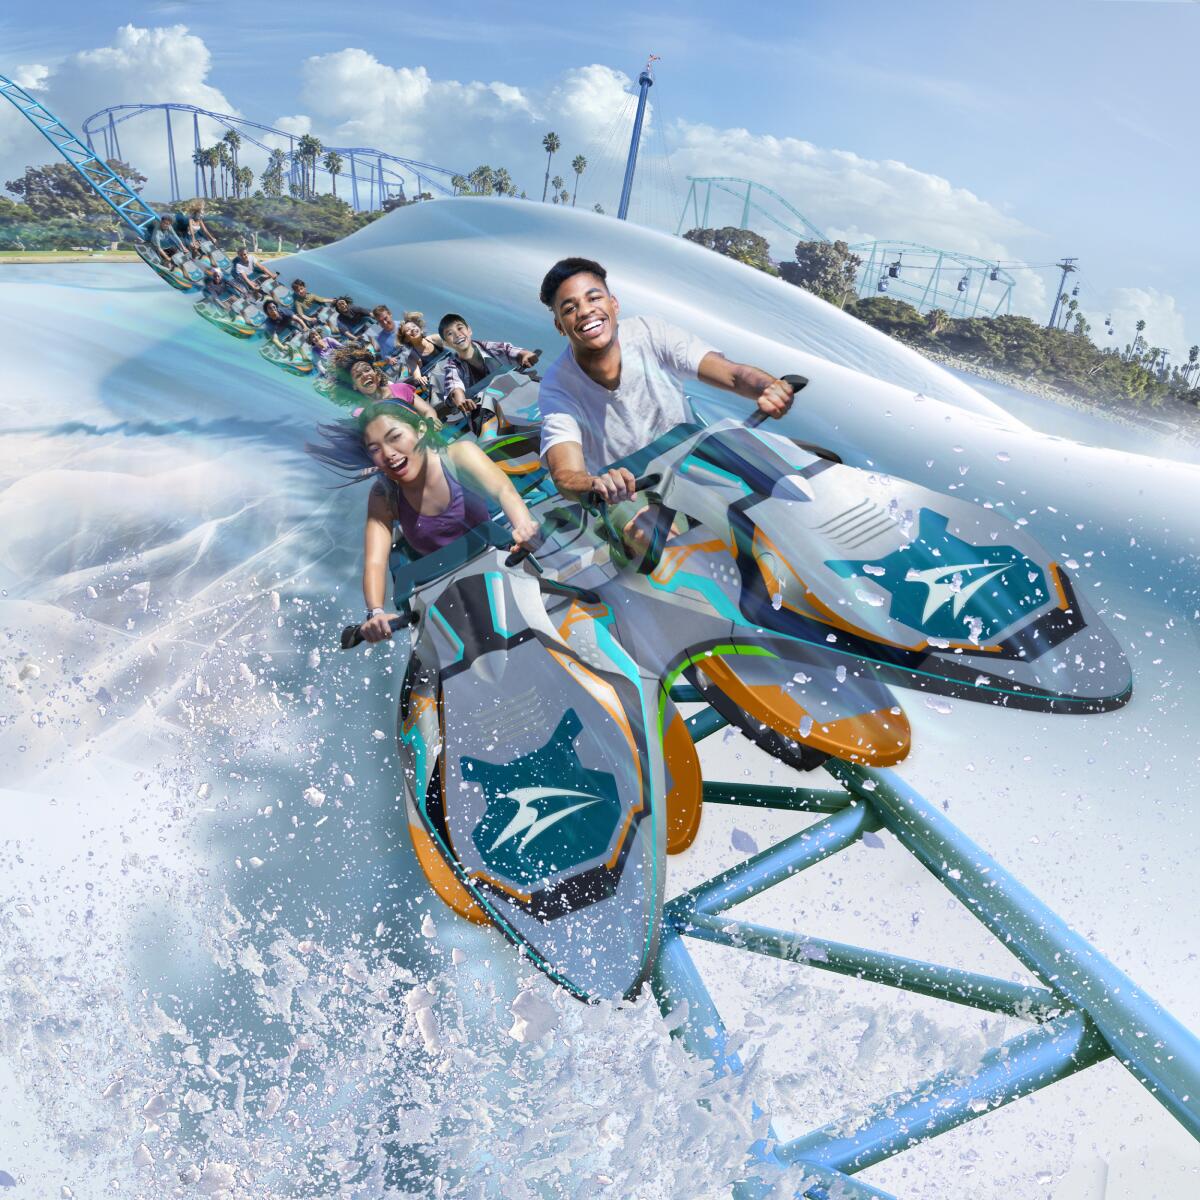 Roller coasters open at SeaWorld San Diego